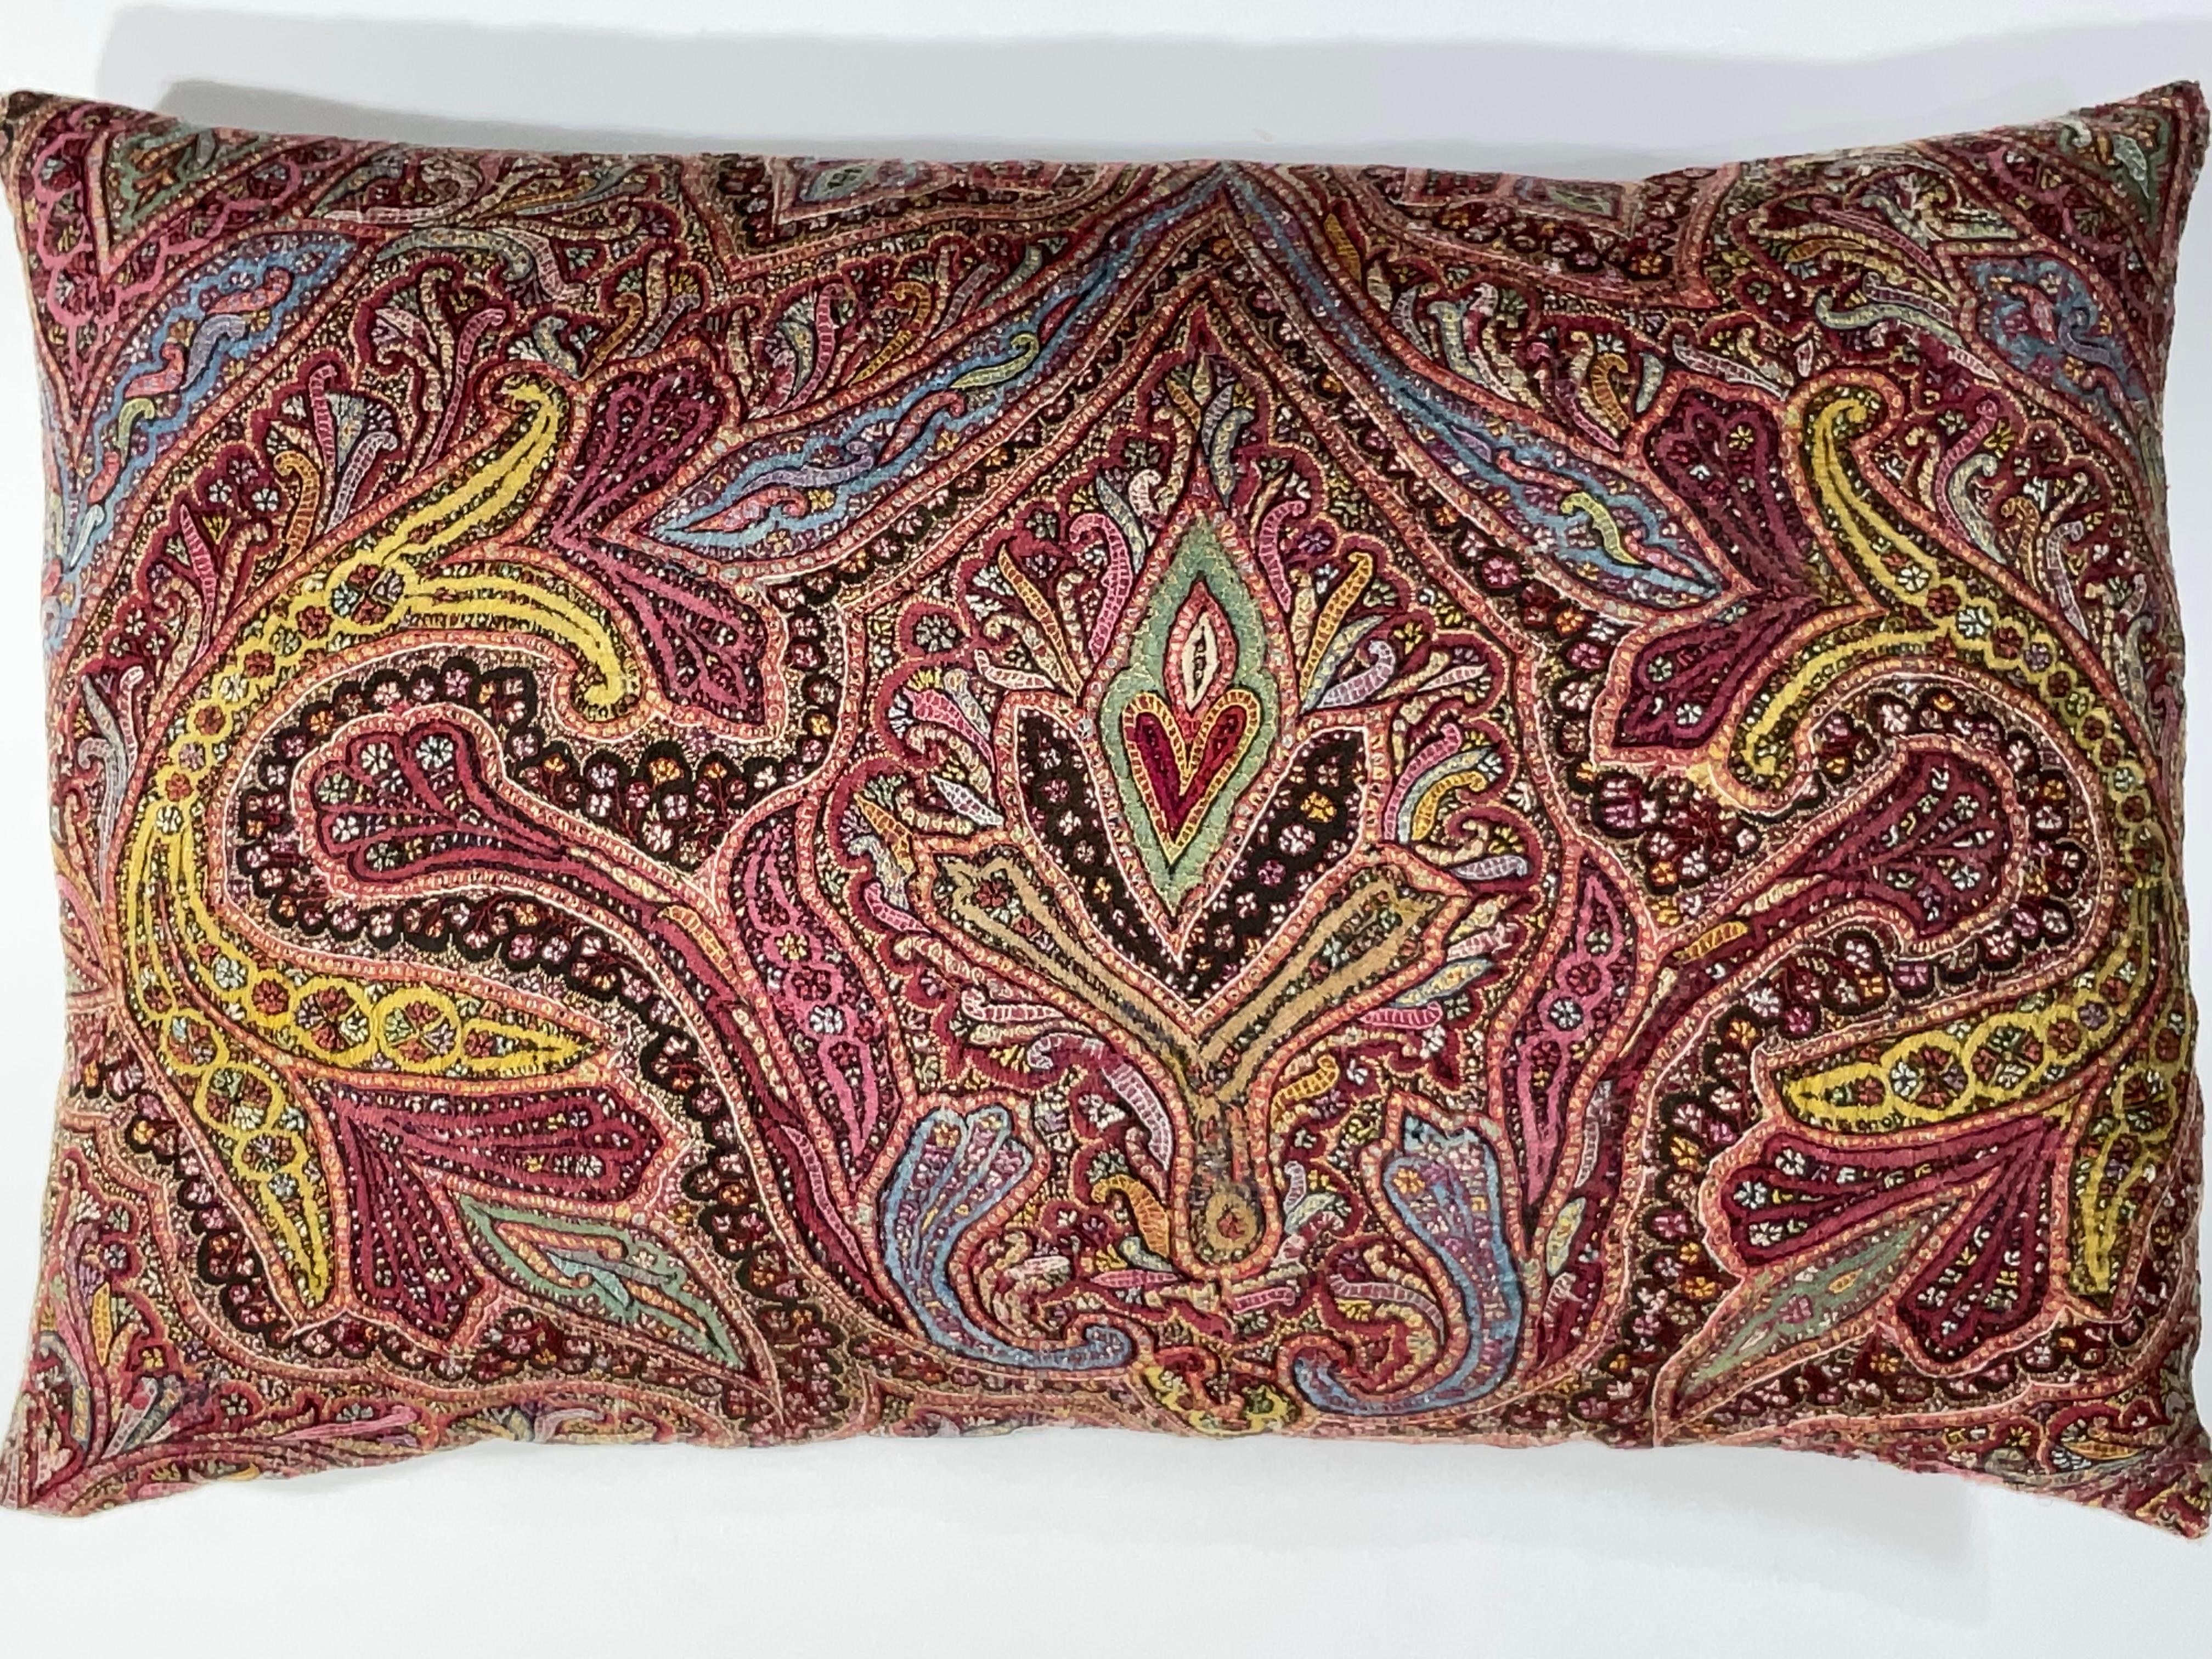 Beautiful fine hand embroidery front pillow made of antique Persian Kermonsha province textile.
Very detailed floral motifs.
Fresh insert ,fine cotton backing.